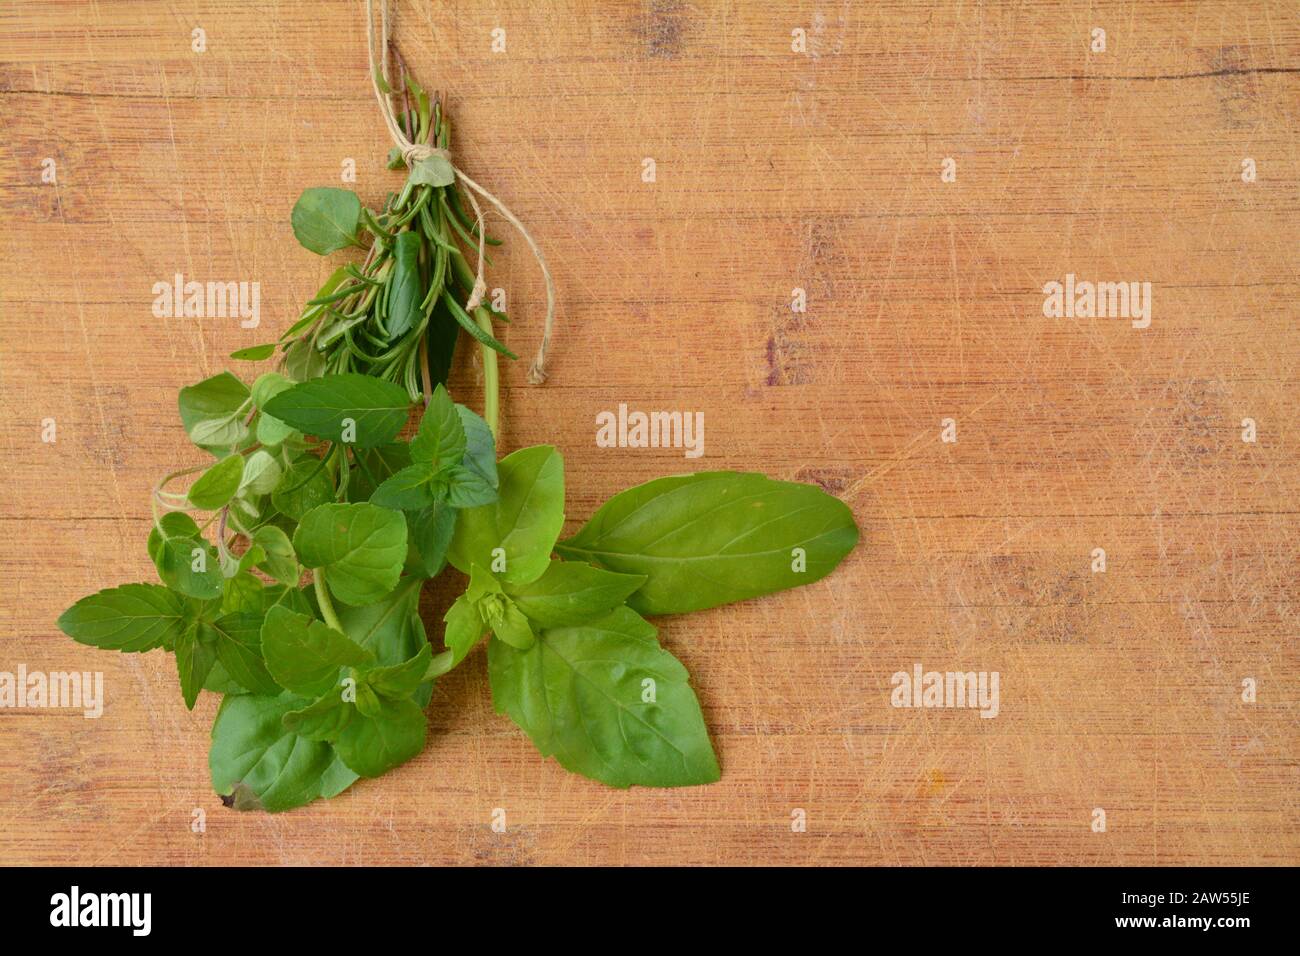 Fresh green aromatic plants, basil, rosemary, peppermint,  mojito mint and oregano tied in a bunch over wooden background Stock Photo